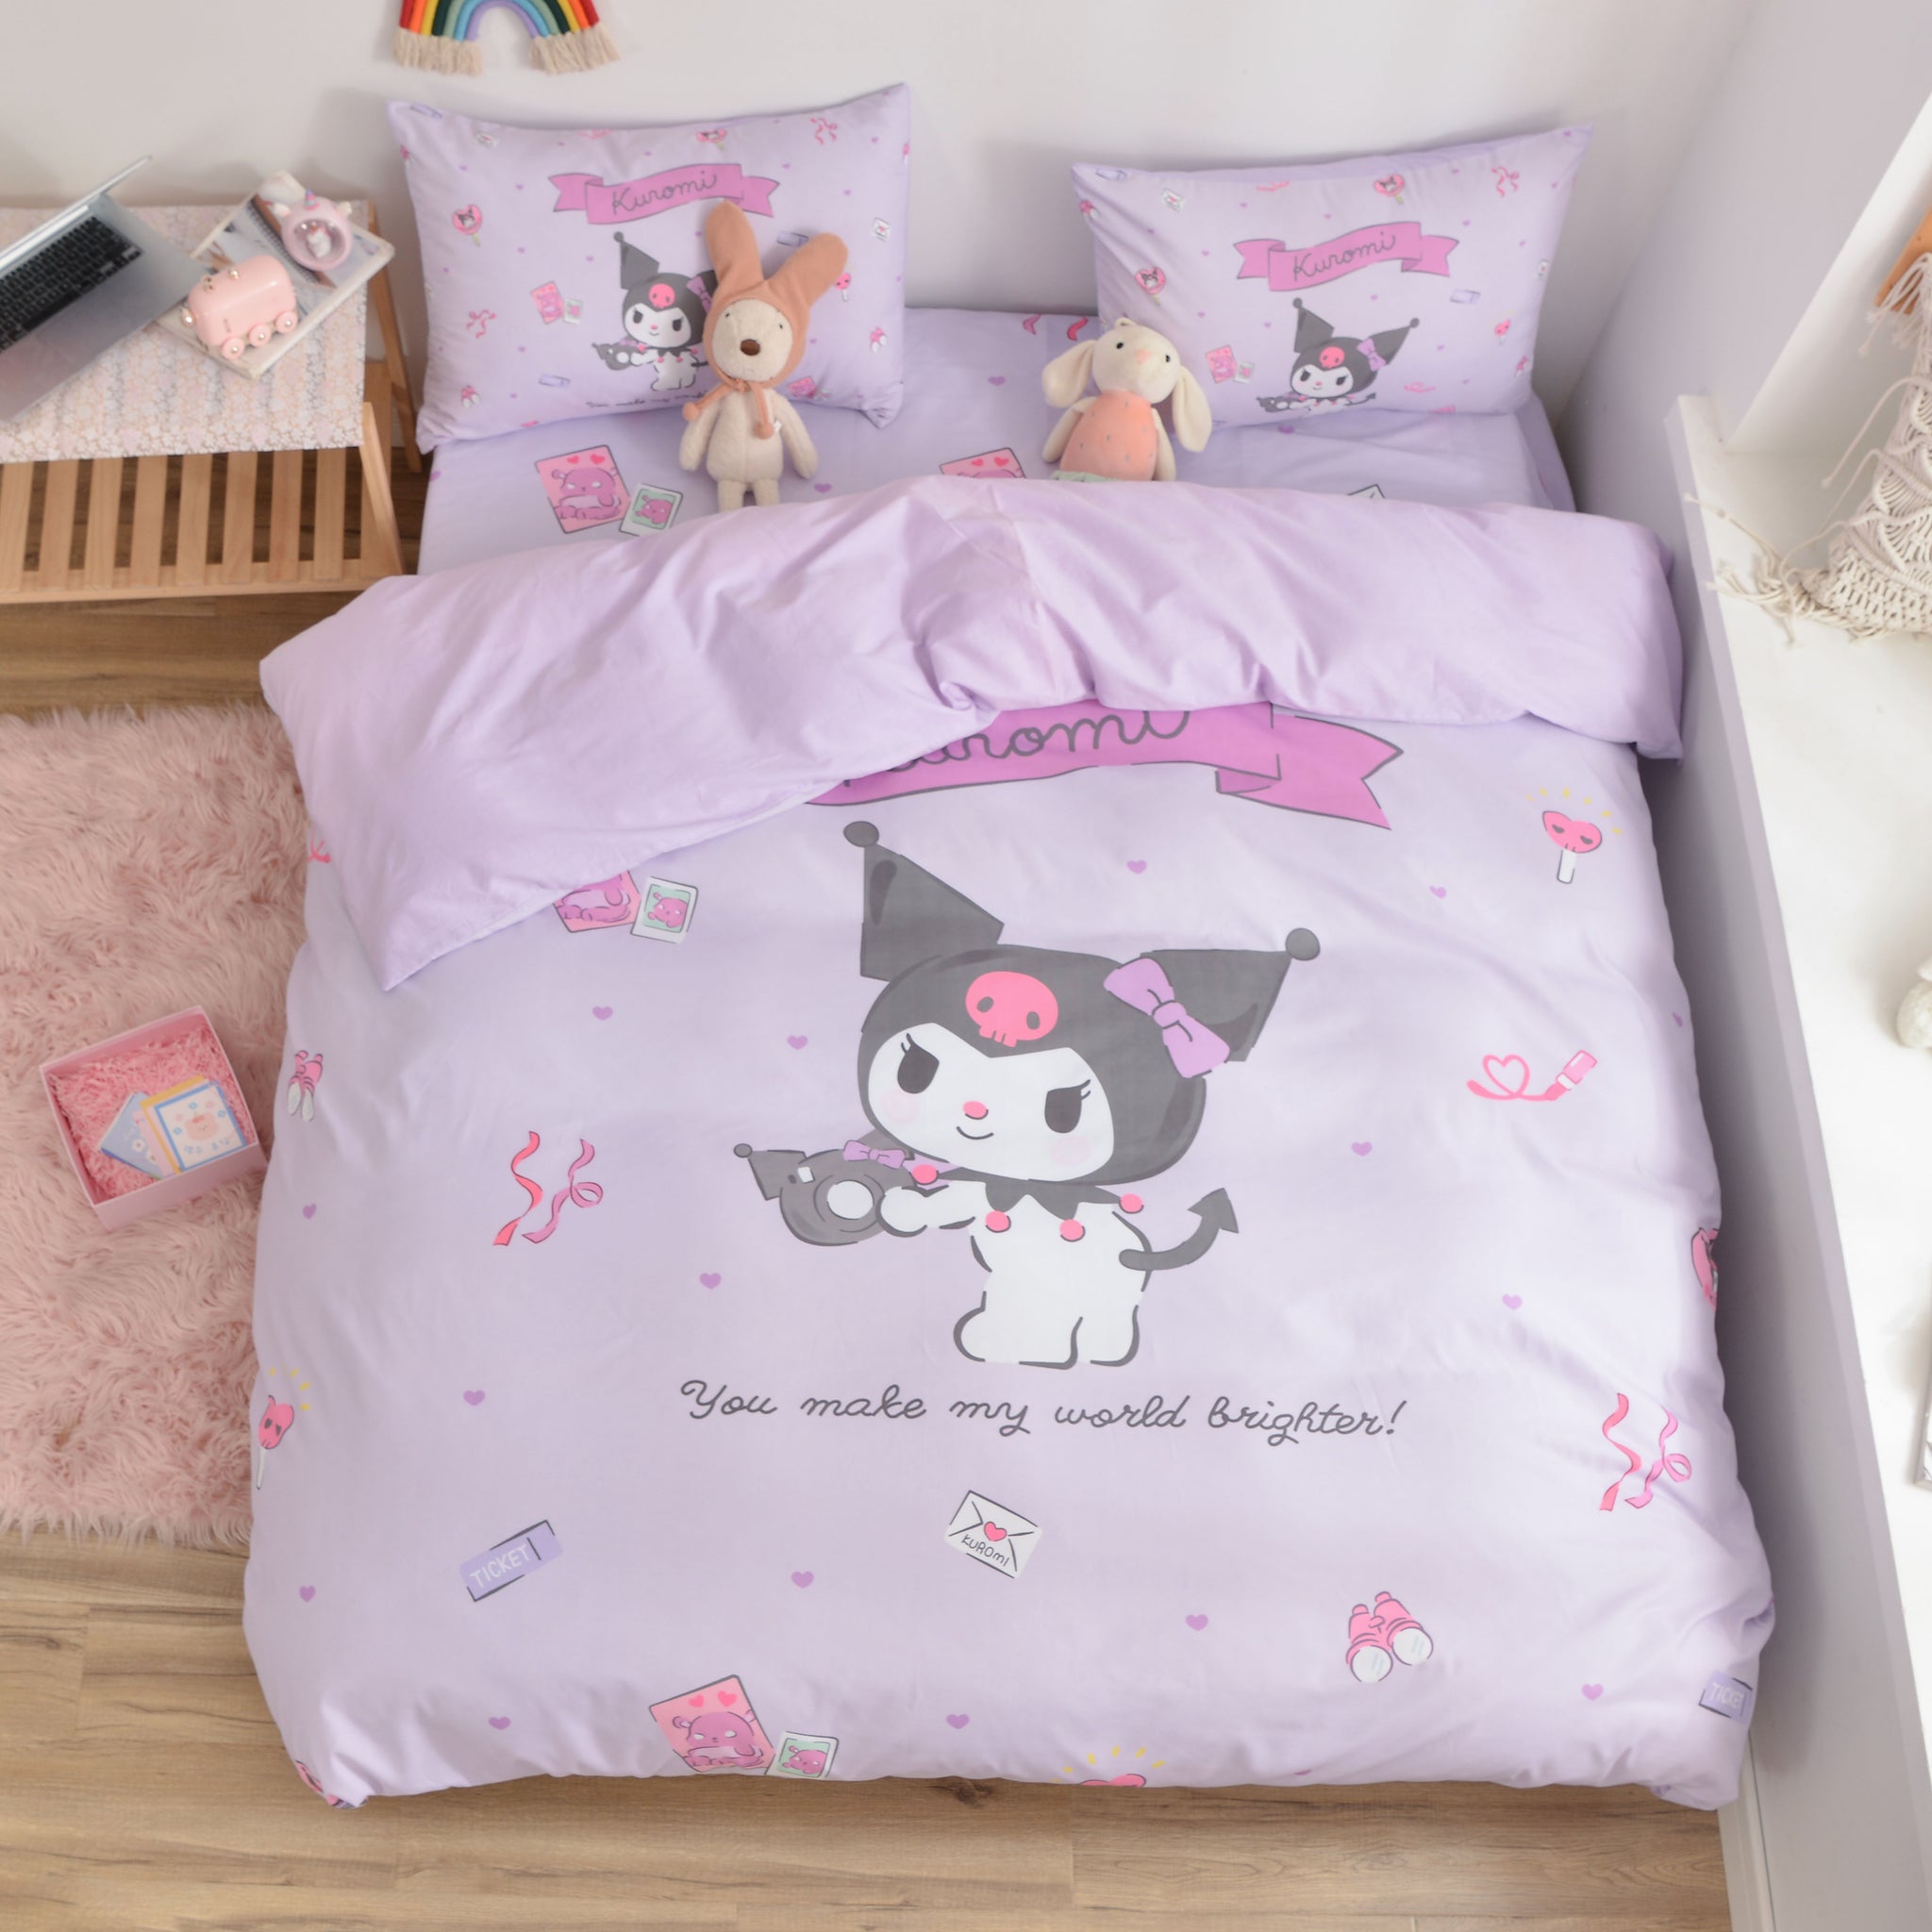 Tokyo Ghoul Bedding Set Anime Comforter Duvet Covers Pillowcases Comfo   CosWigShopcom